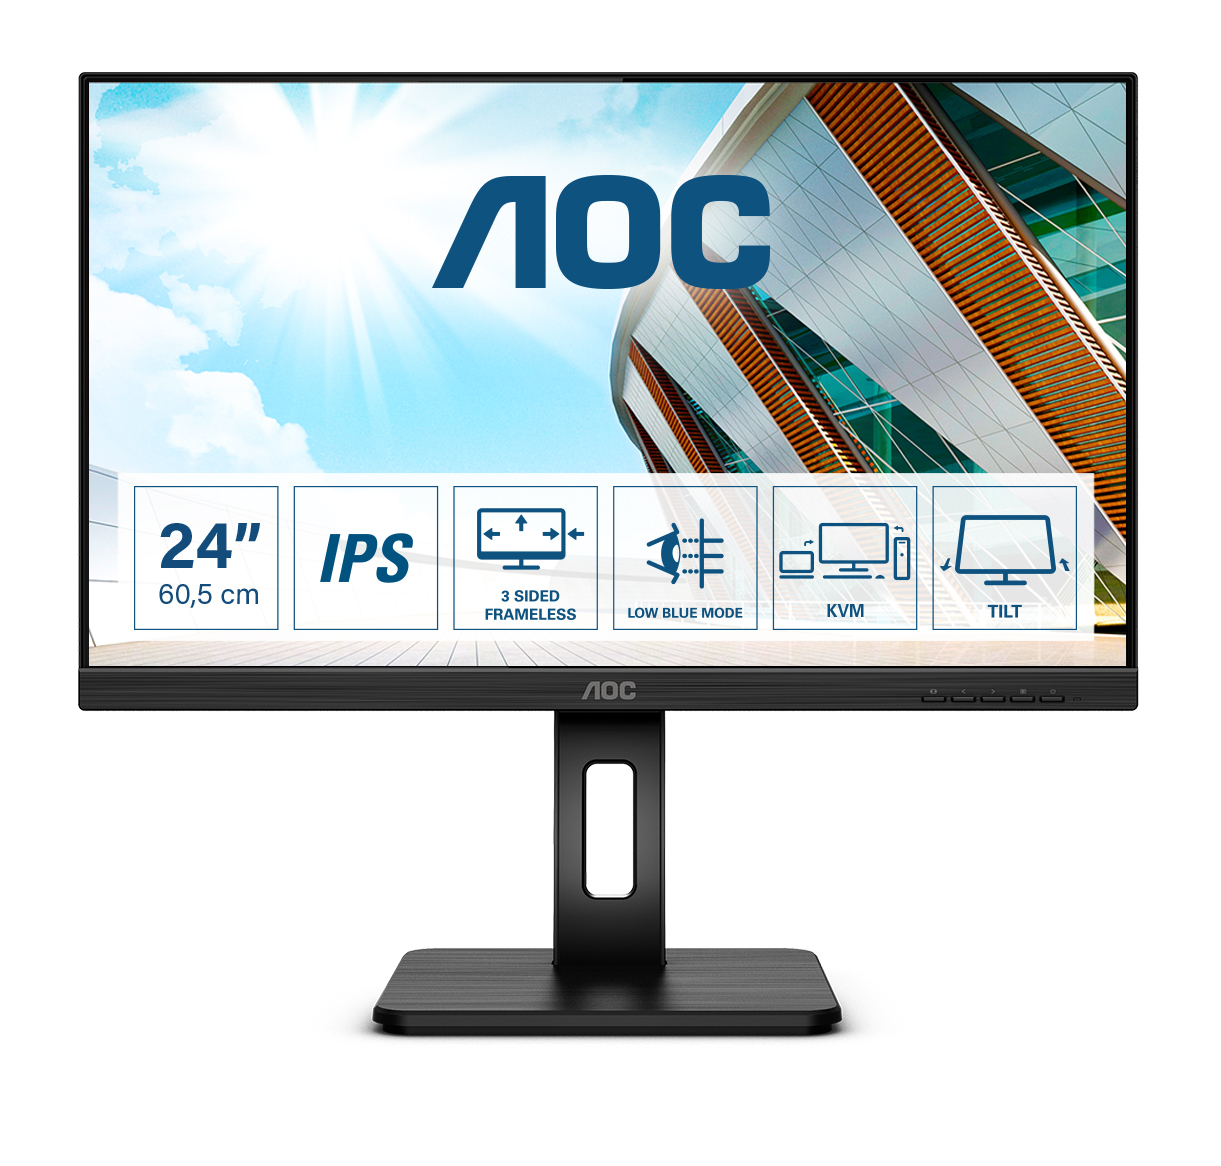 Screen size (inch) 23.8, Panel resolution 1920x1080, Refresh rate 75 Hz, Panel type IPS, USB-C connectivity USB-C 3.2 x 1 (DP alt mode, upstream, power delivery up to 65 W), HDMI HDMI 1.4 x 1, Display Port DisplayPort 1.2 x 1, Sync technology (VRR) Adapti